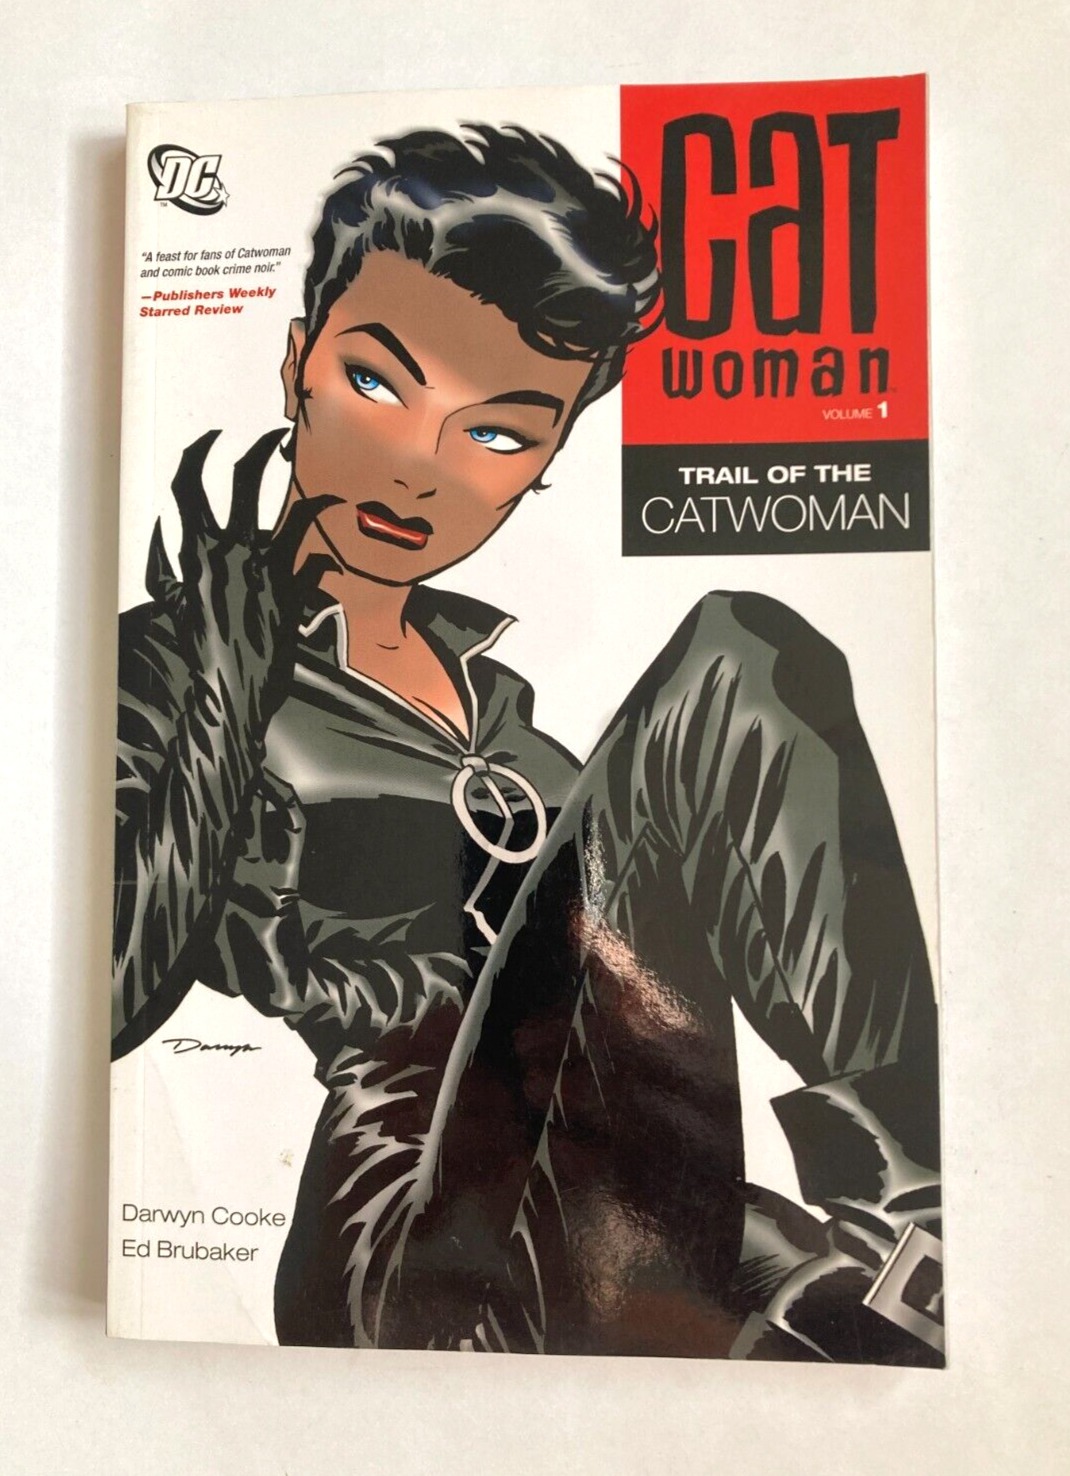 Catwoman Trail of the Catwoman Vol 1 DC Graphic Novel 1st Printing TPB 2011